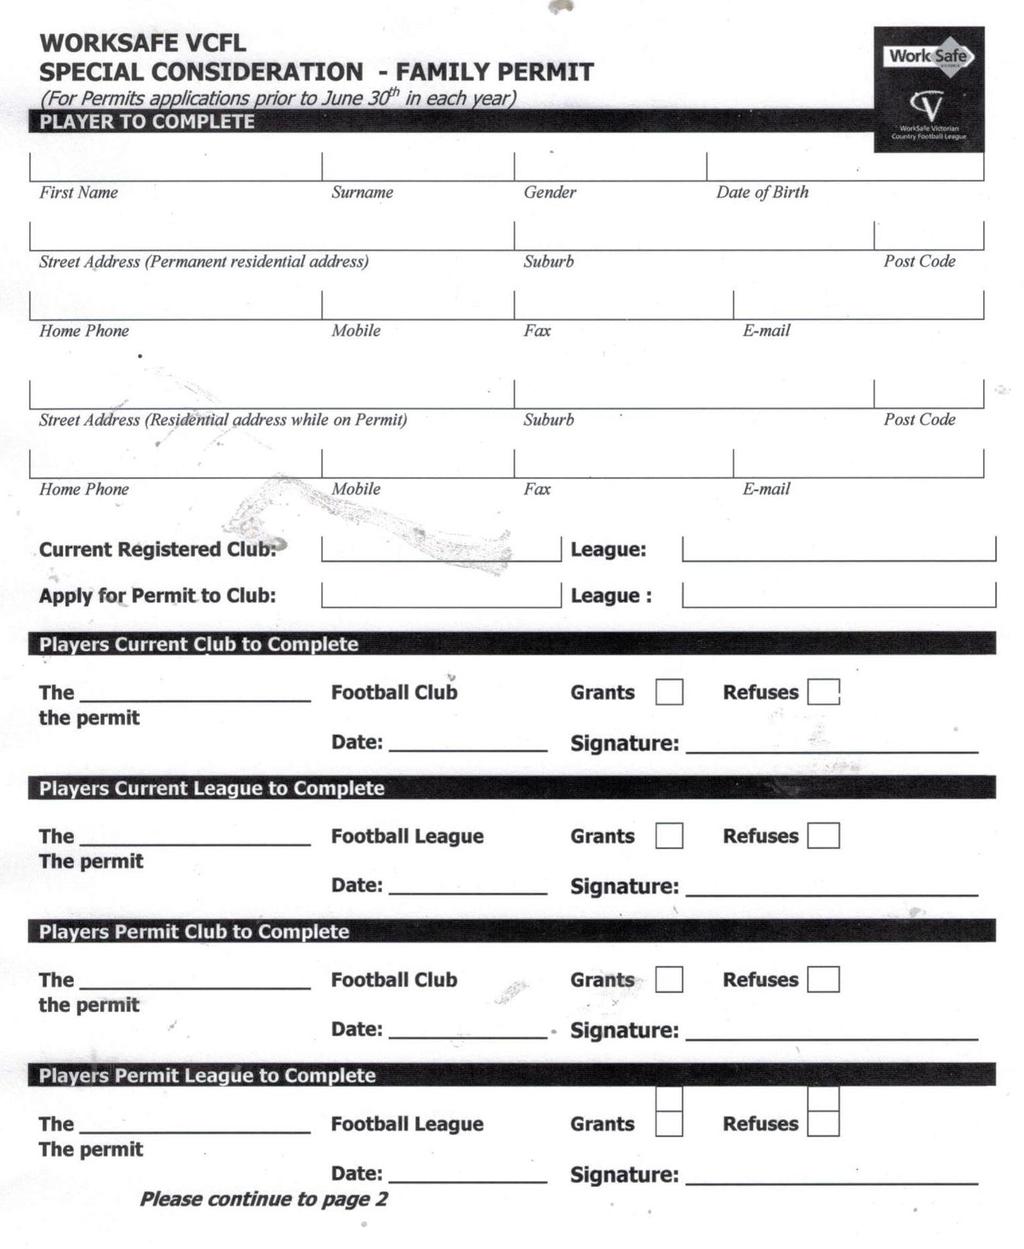 APPENDIX 23: VWA AFL VIC COUNTRY SPECIAL CIRCUMSTANCE FAMILY PERMIT This form